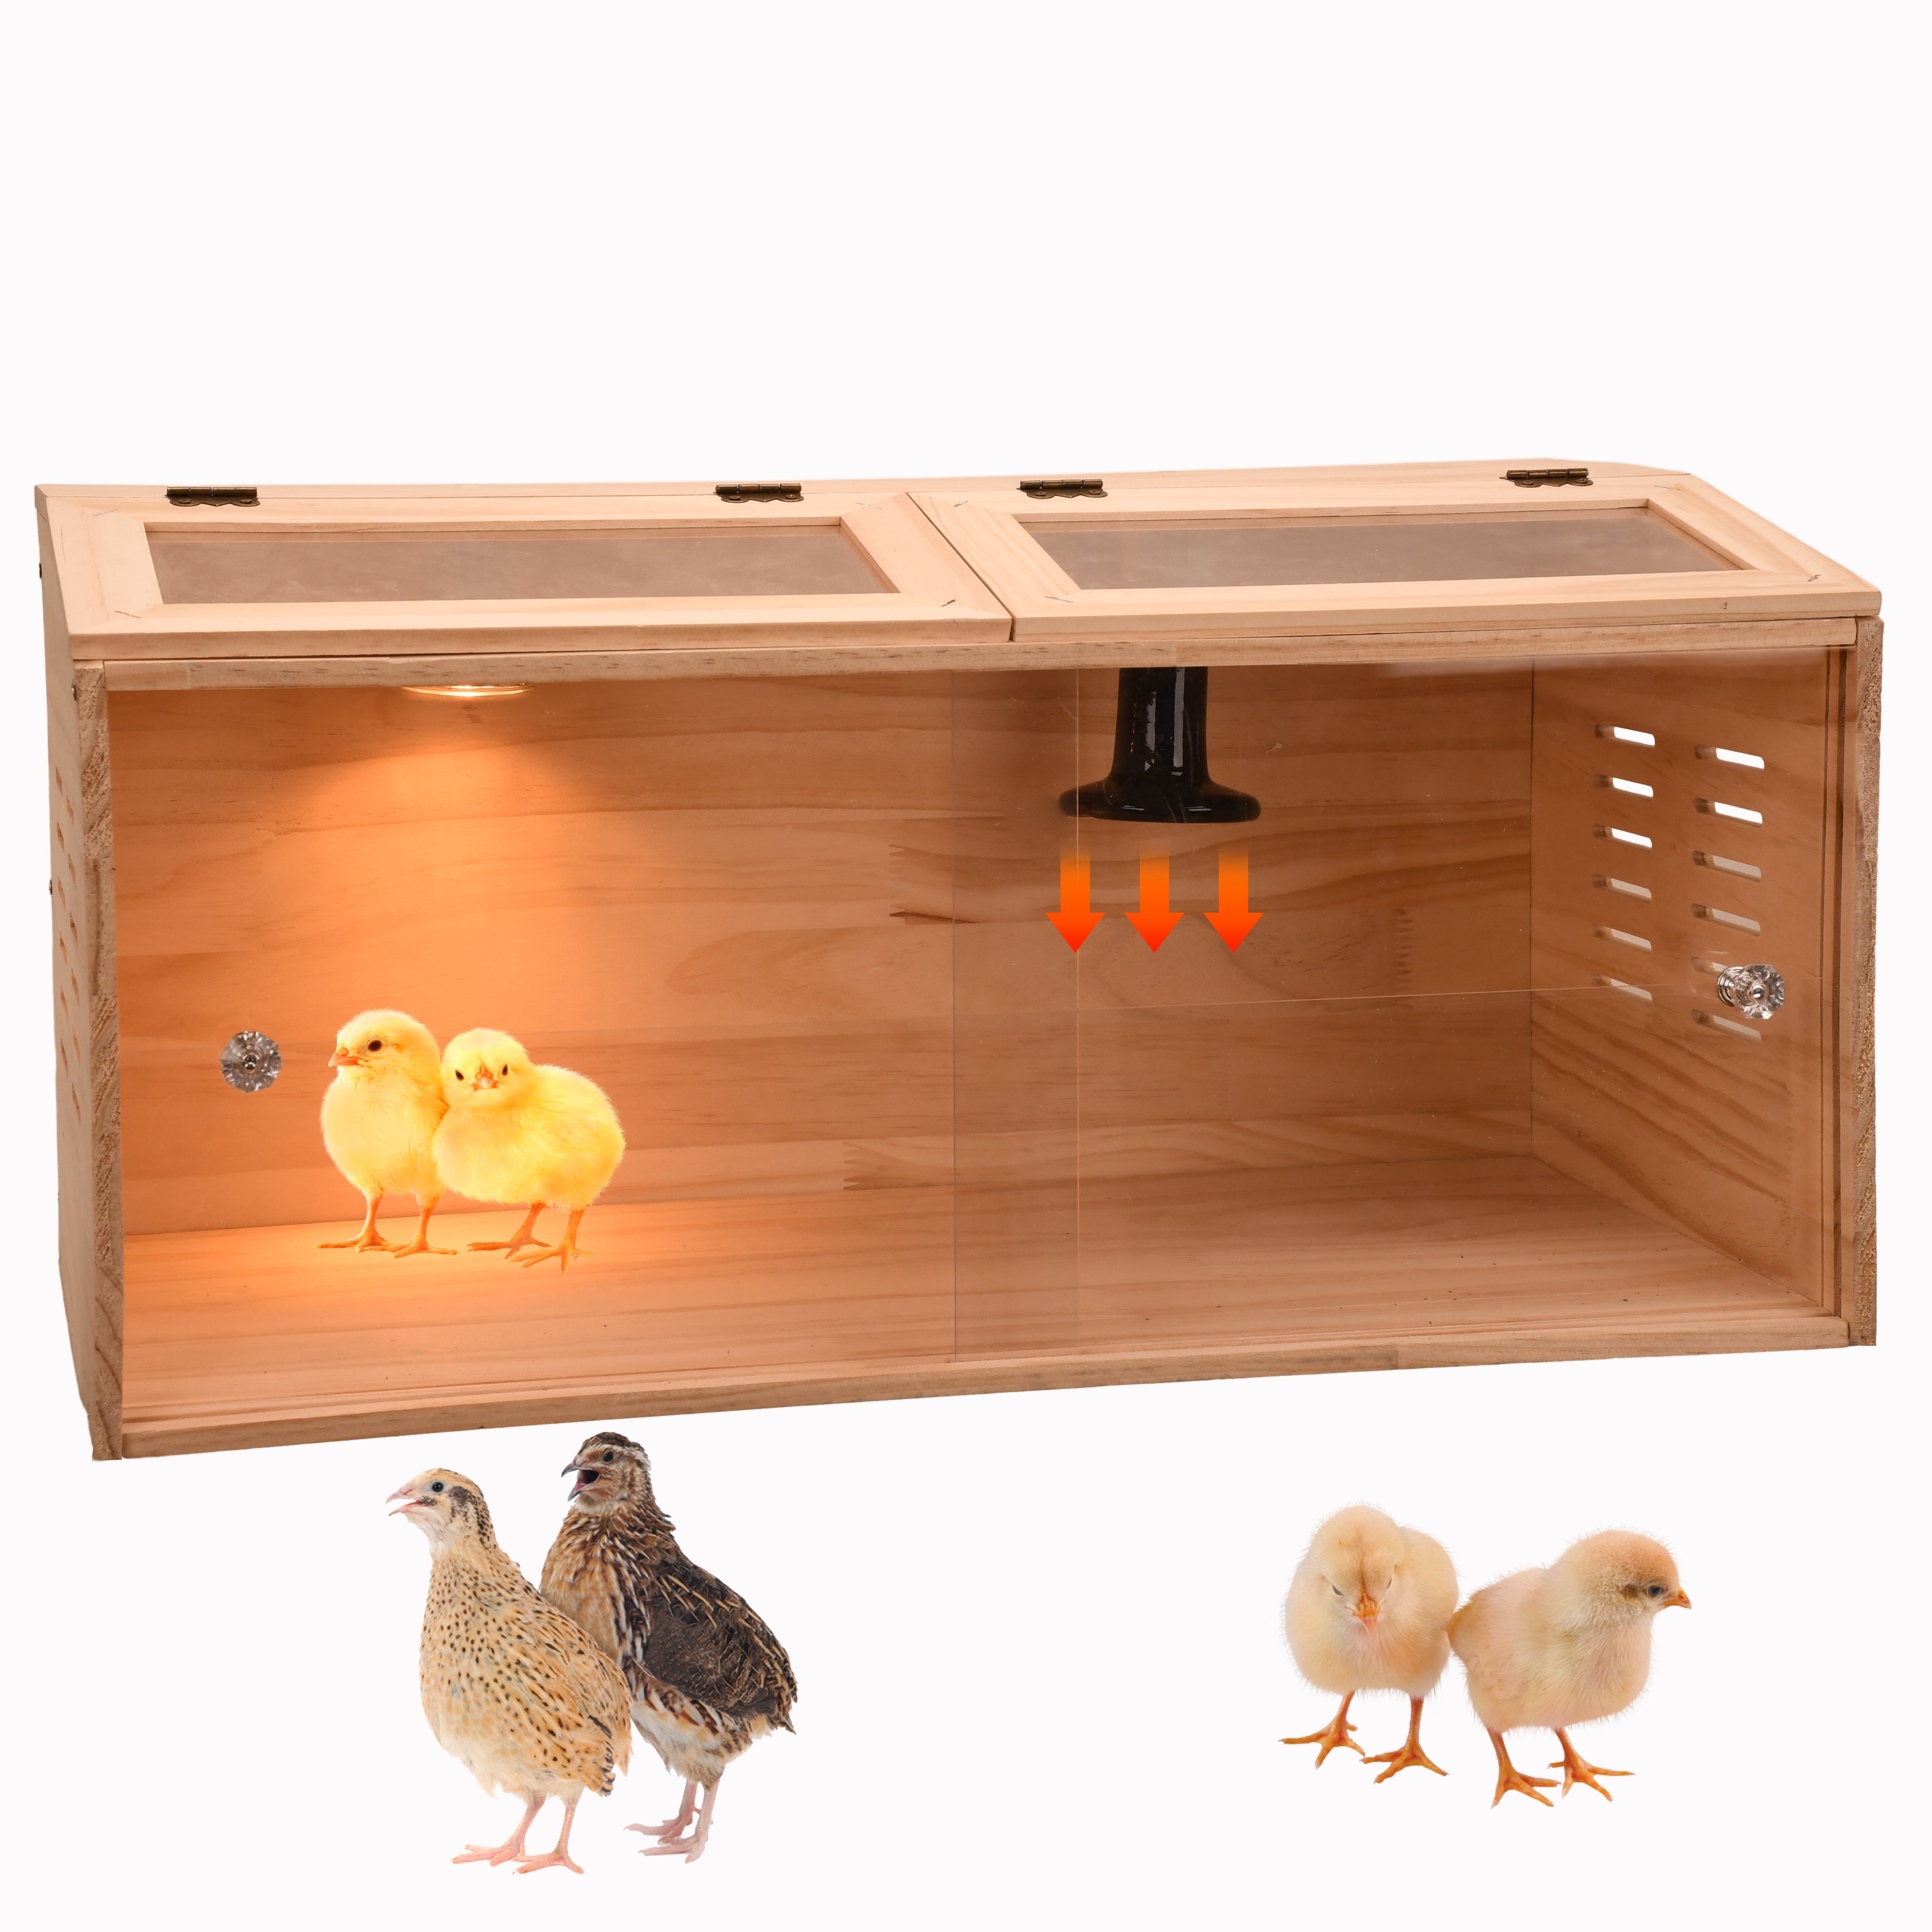 10-15 Chick brooder Box, Intelligent Brooder Box, Chick brooder Box with Heating lamp, Poultry Heater breeding Box, Quail Bird Chick Brooding Box